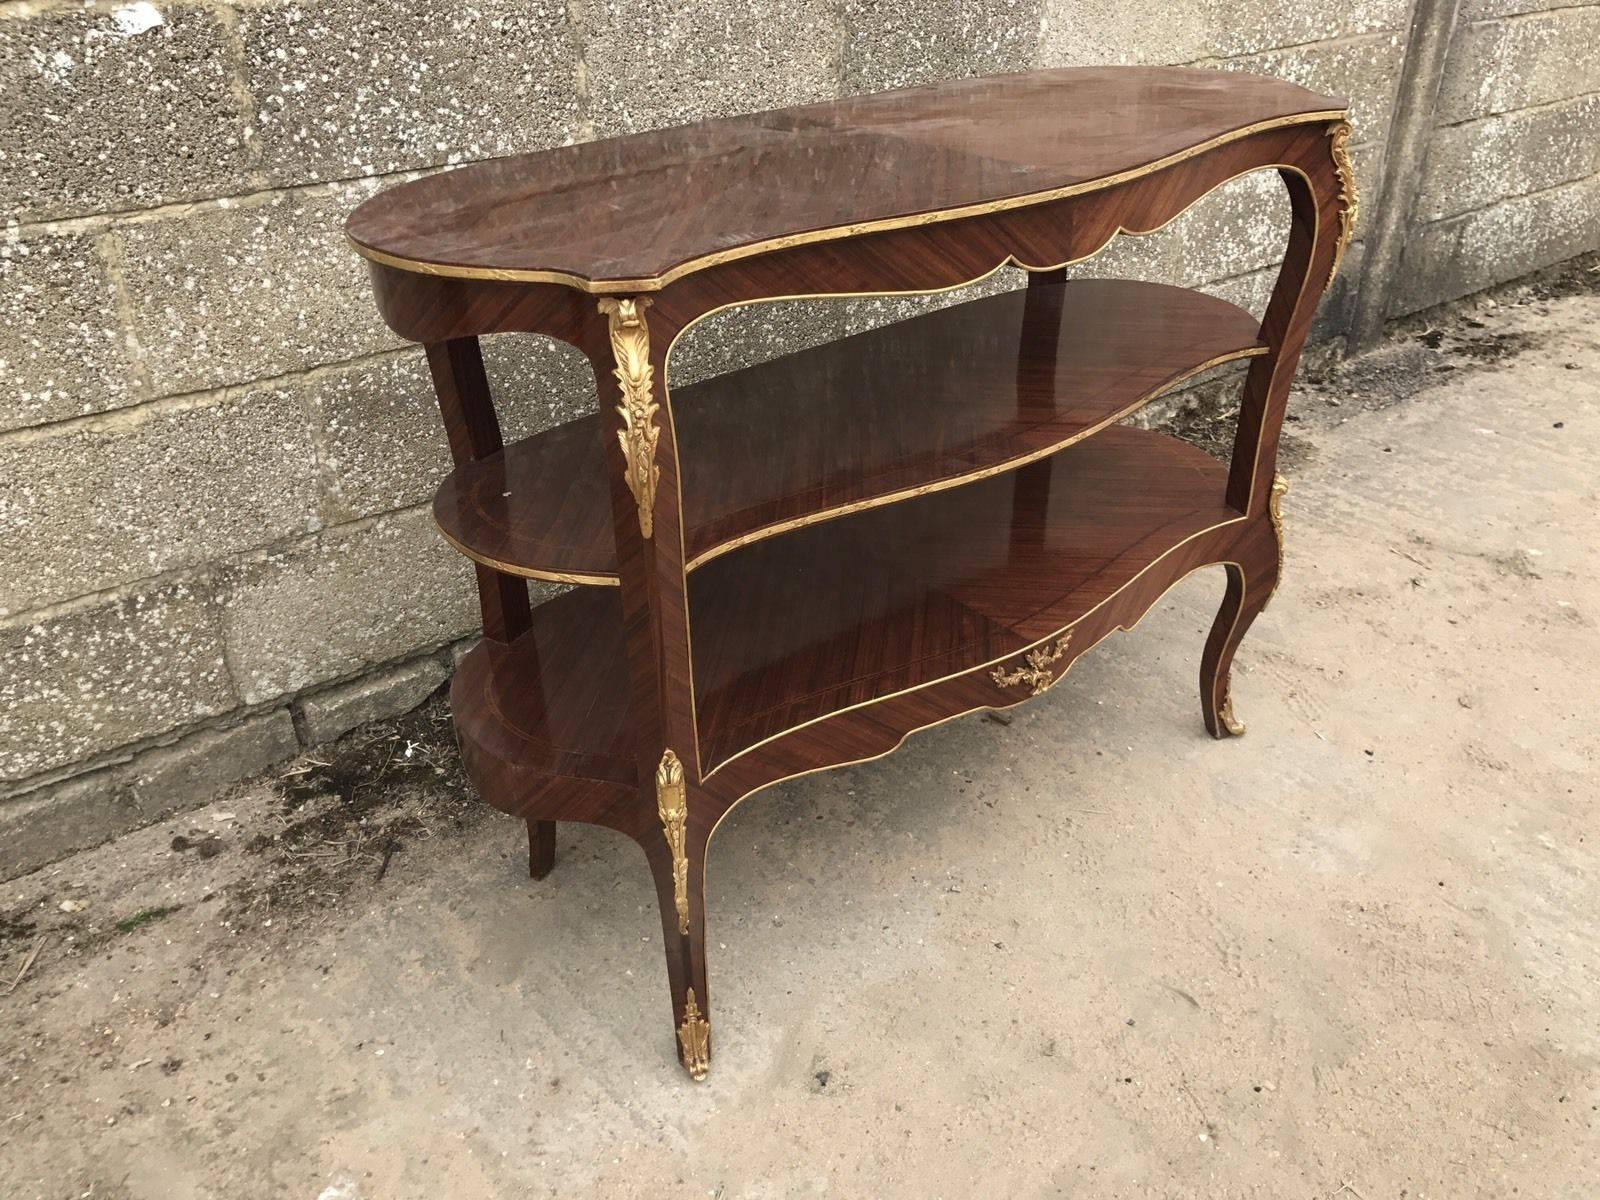 Large Antique French Inlaid Three-Tier Side Table, Bronze Trolley In Good Condition For Sale In Lingfield, West Sussex